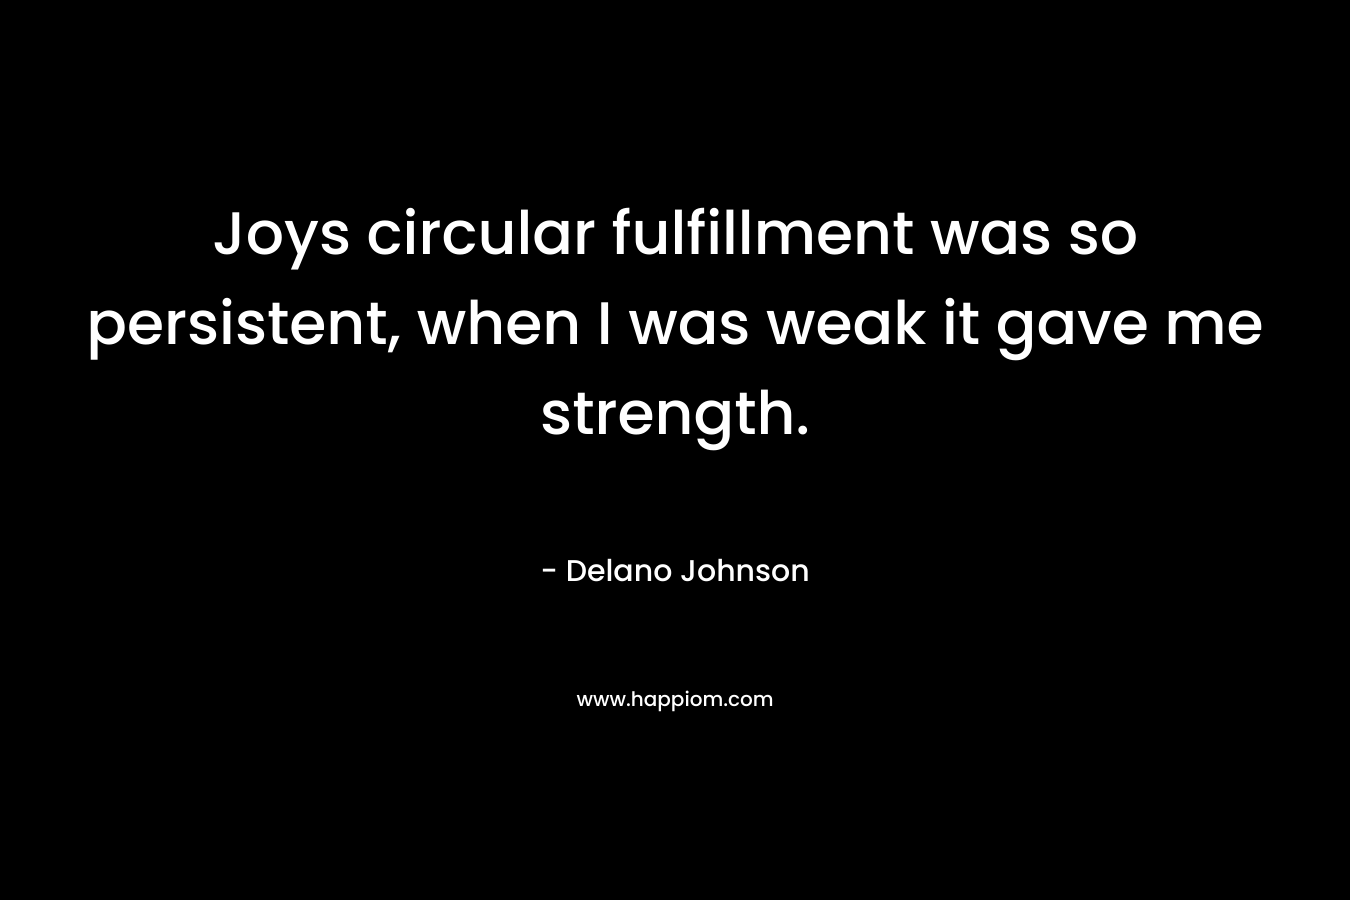 Joys circular fulfillment was so persistent, when I was weak it gave me strength.